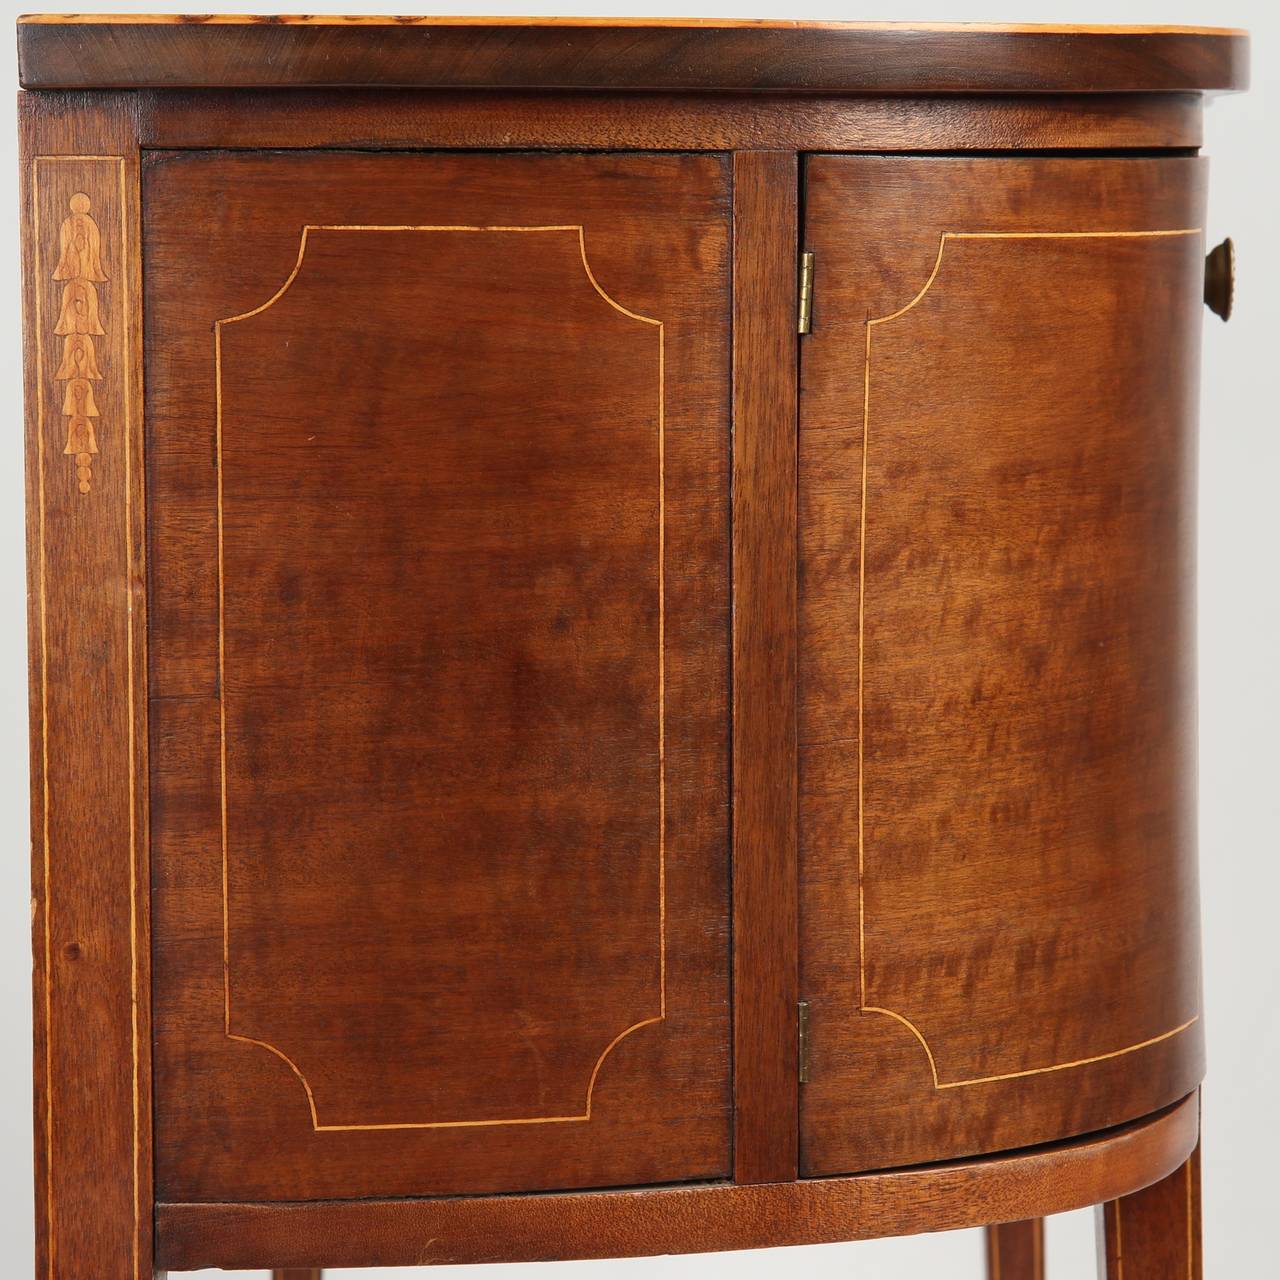 Mahogany Small American Federal Style Inlaid Sideboard Console c. 1890-1910